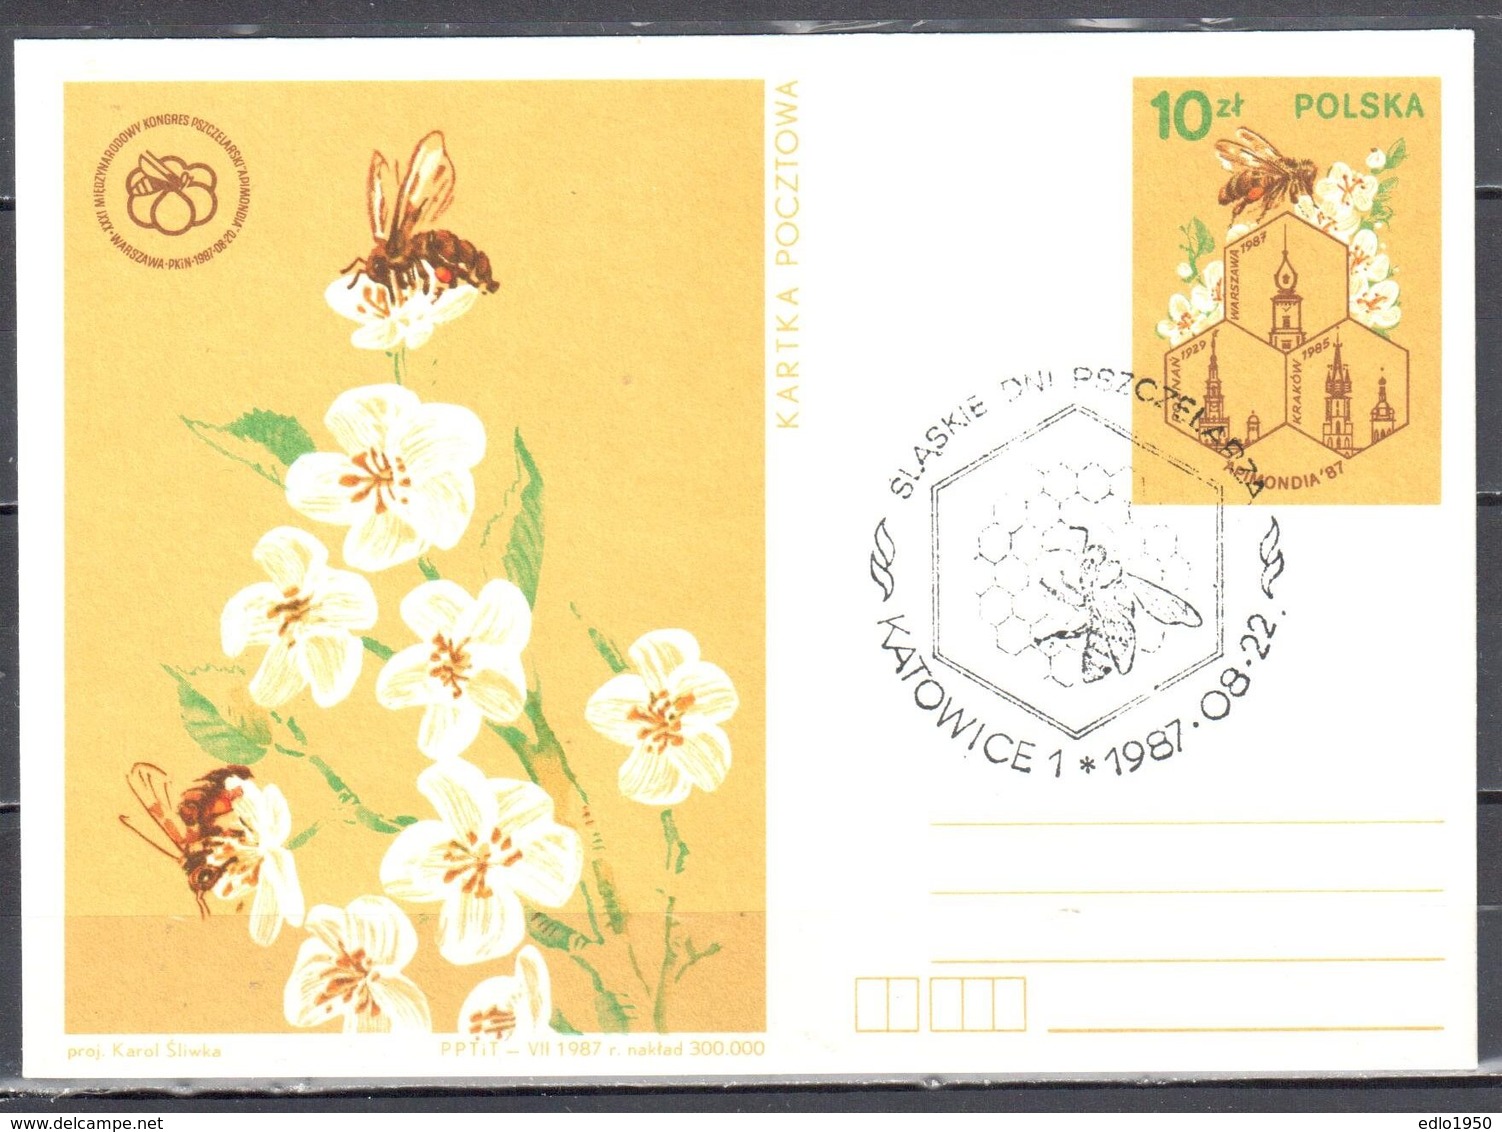 Poland 1987 - Inter. Beekeeping Congress - Bees, Dzierzon - Cp 962 - Postcard - Special Postmark - Stamped Stationery